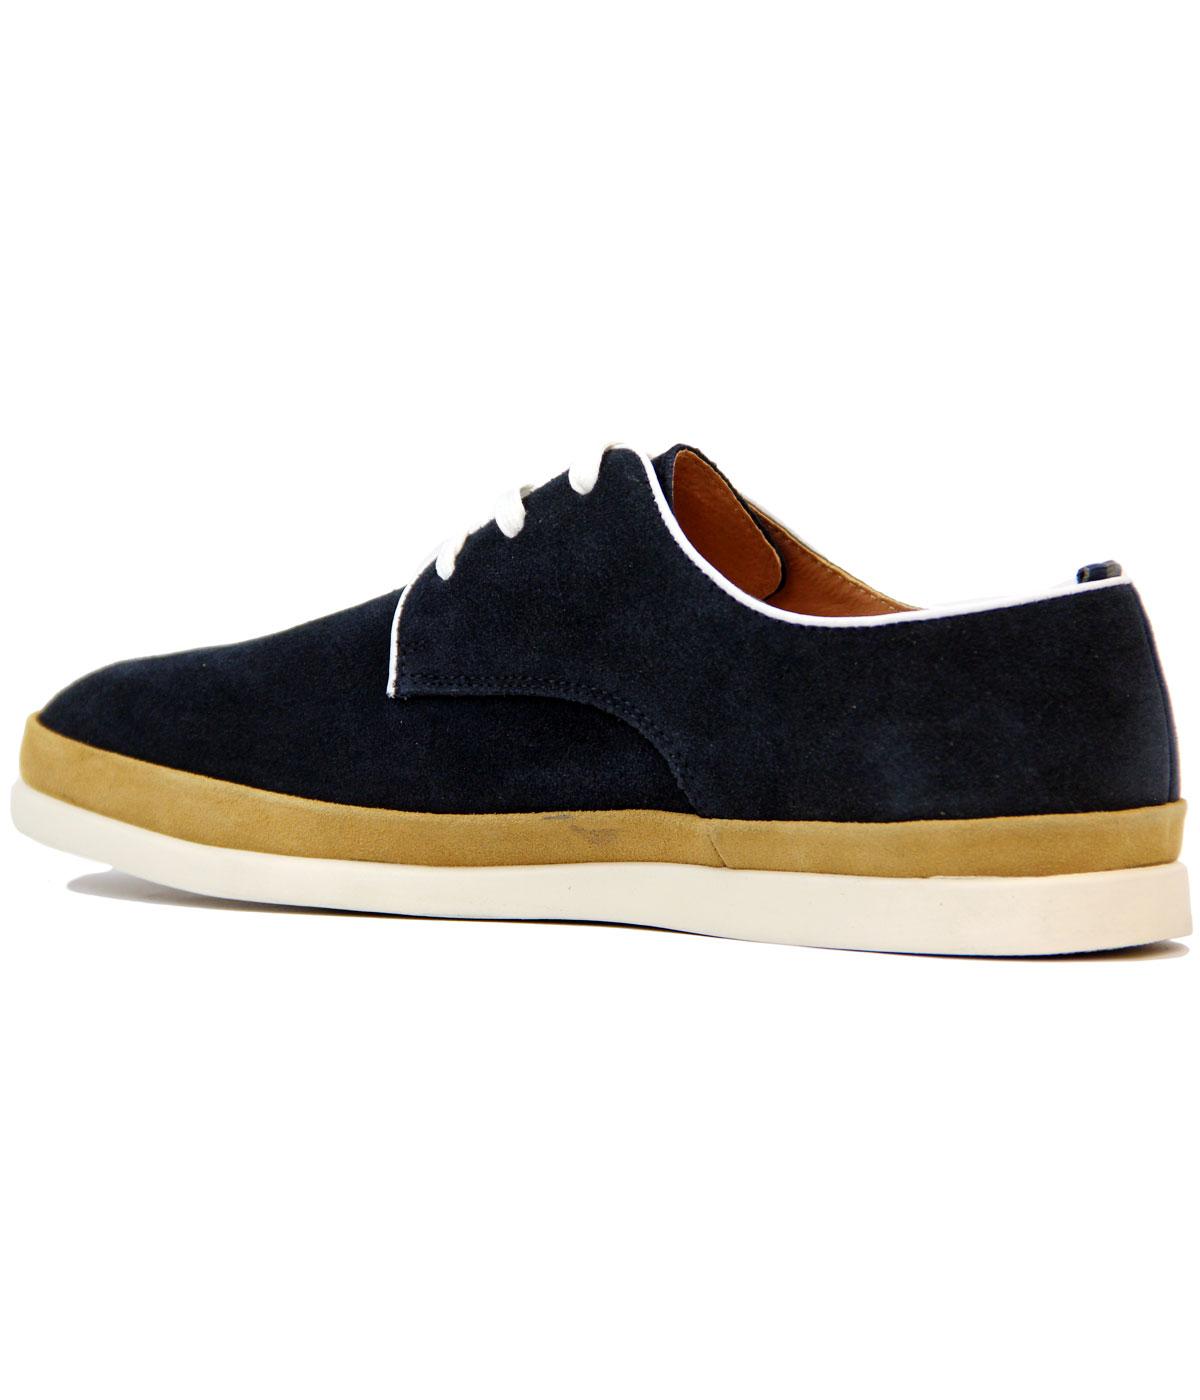 PETER WERTH Caine Retro 60s Mod Derby Hybrid Suede Shoes in Navy